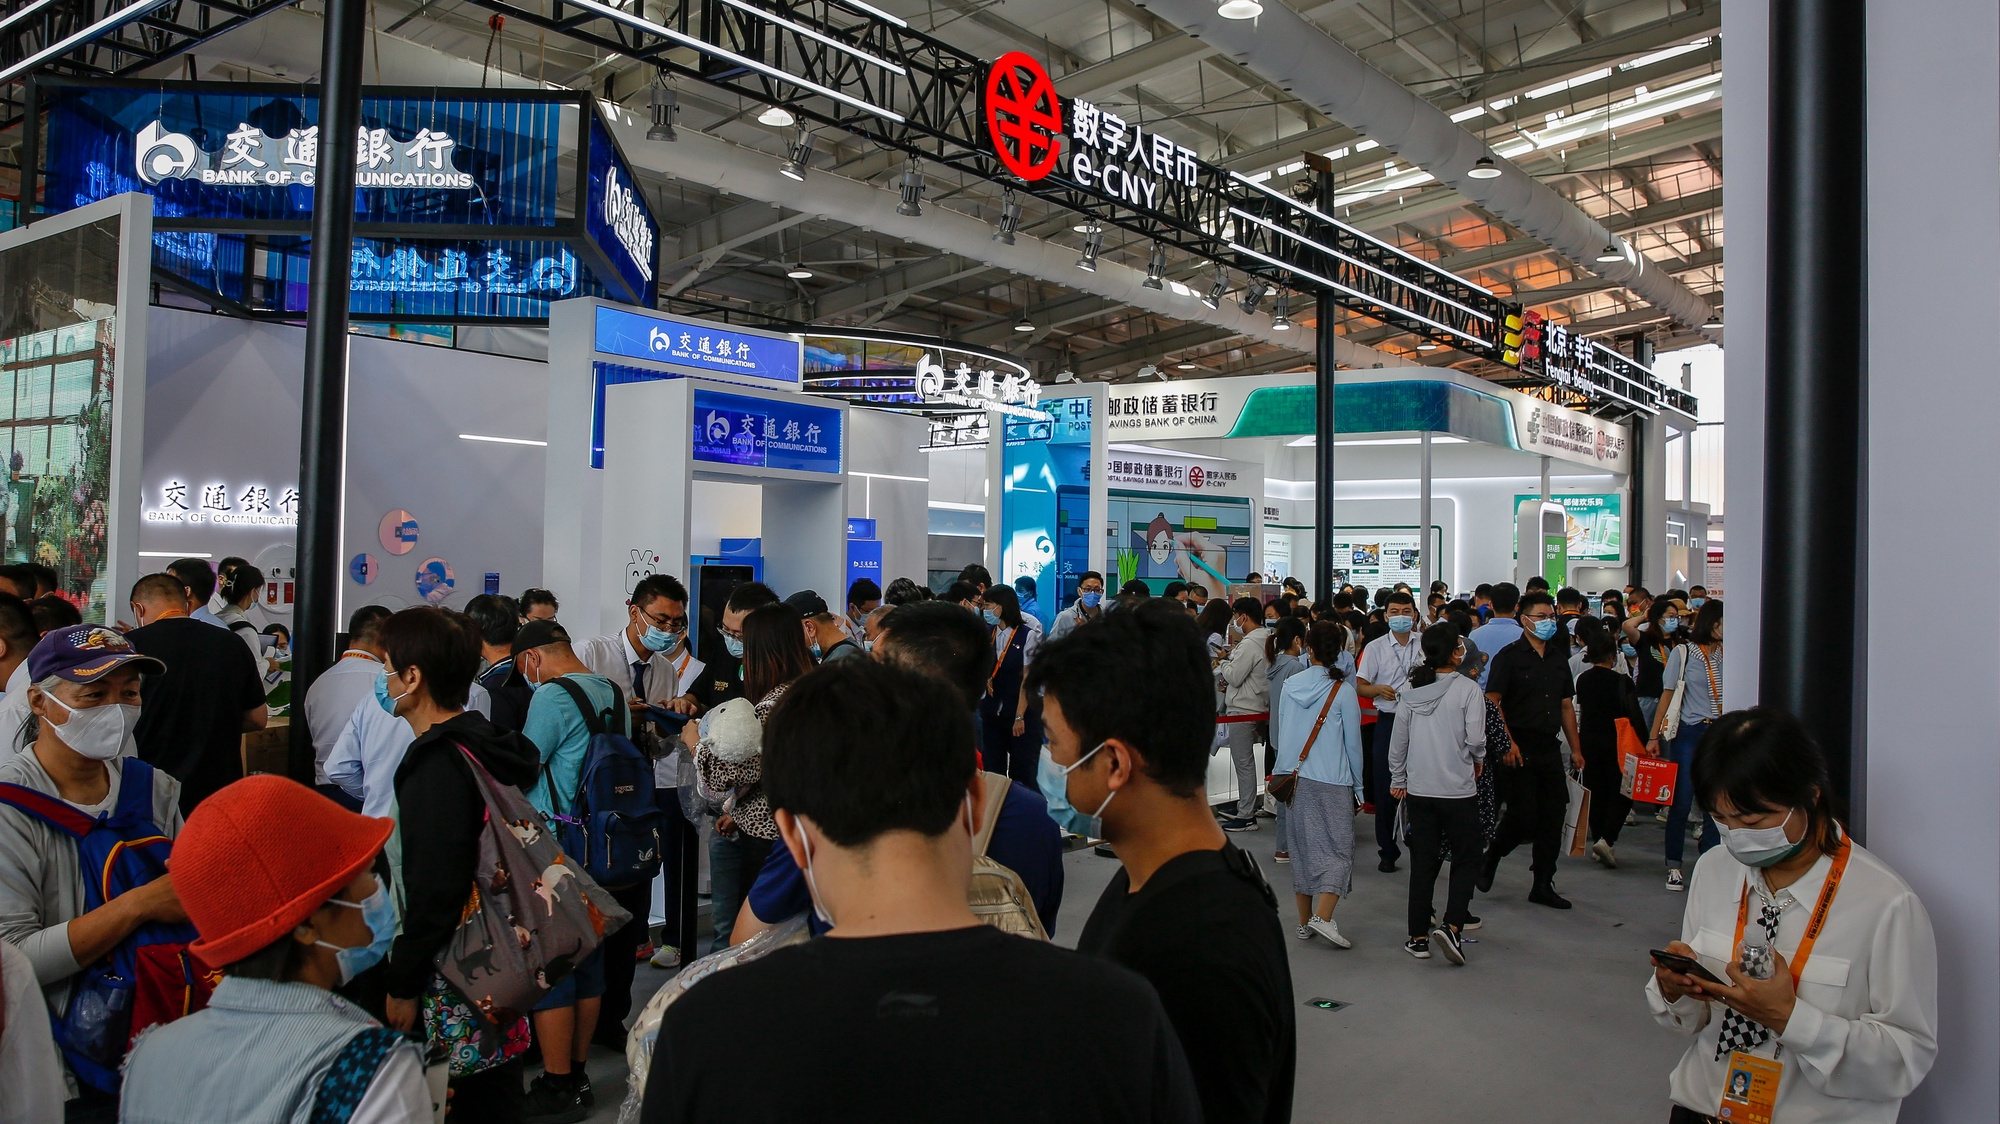 epa10160779 Visitors at the financial services area using e-CNY or digital yuan during the China International Fair for Trade in Services (CIFTIS) at the Shougang Park in Beijing, China, 05 September 2022. The China International Fair for Trade in Services is the largest comprehensive fair for trade in services and the leading fair for trade in services in China.  EPA/MARK R. CRISTINO